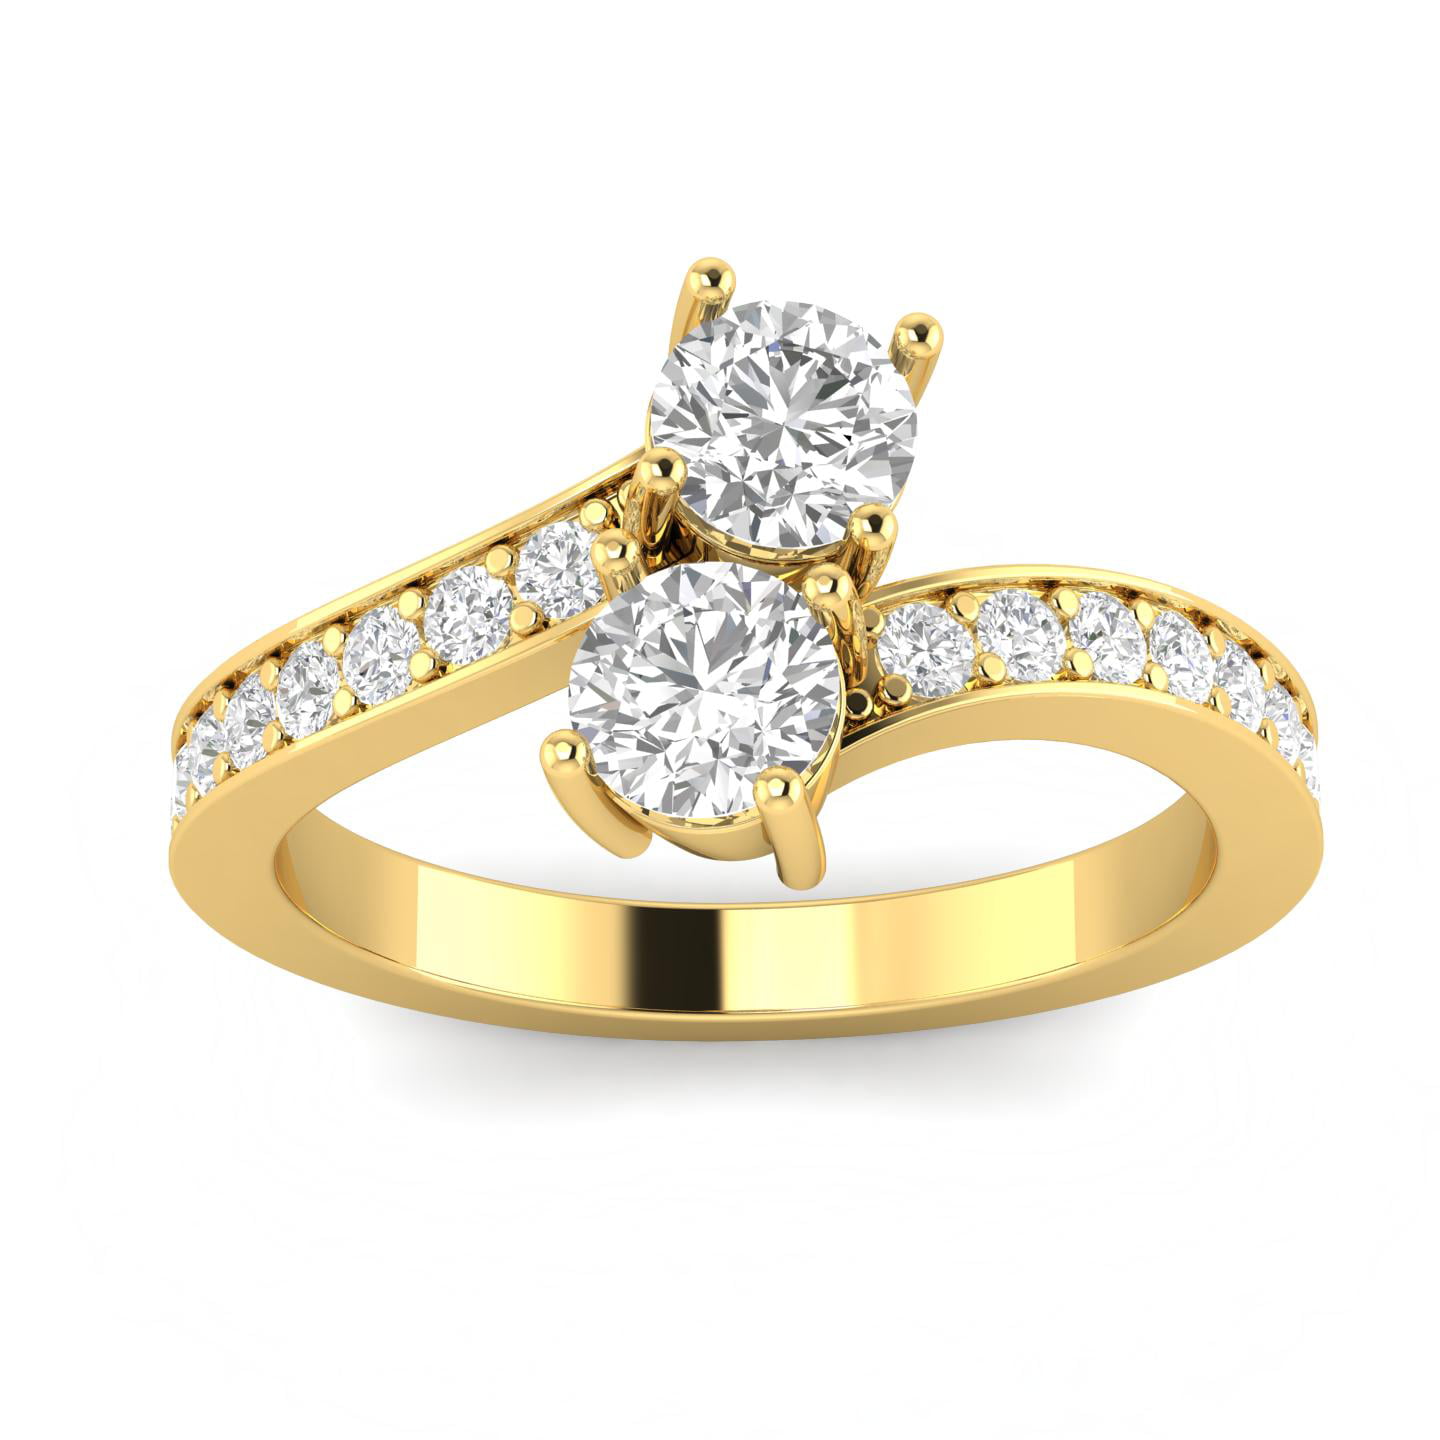 1.00ctw Diamond Two Stone Ring in 10k Yellow Gold (G-H, I2-I3, 1.00ctw)